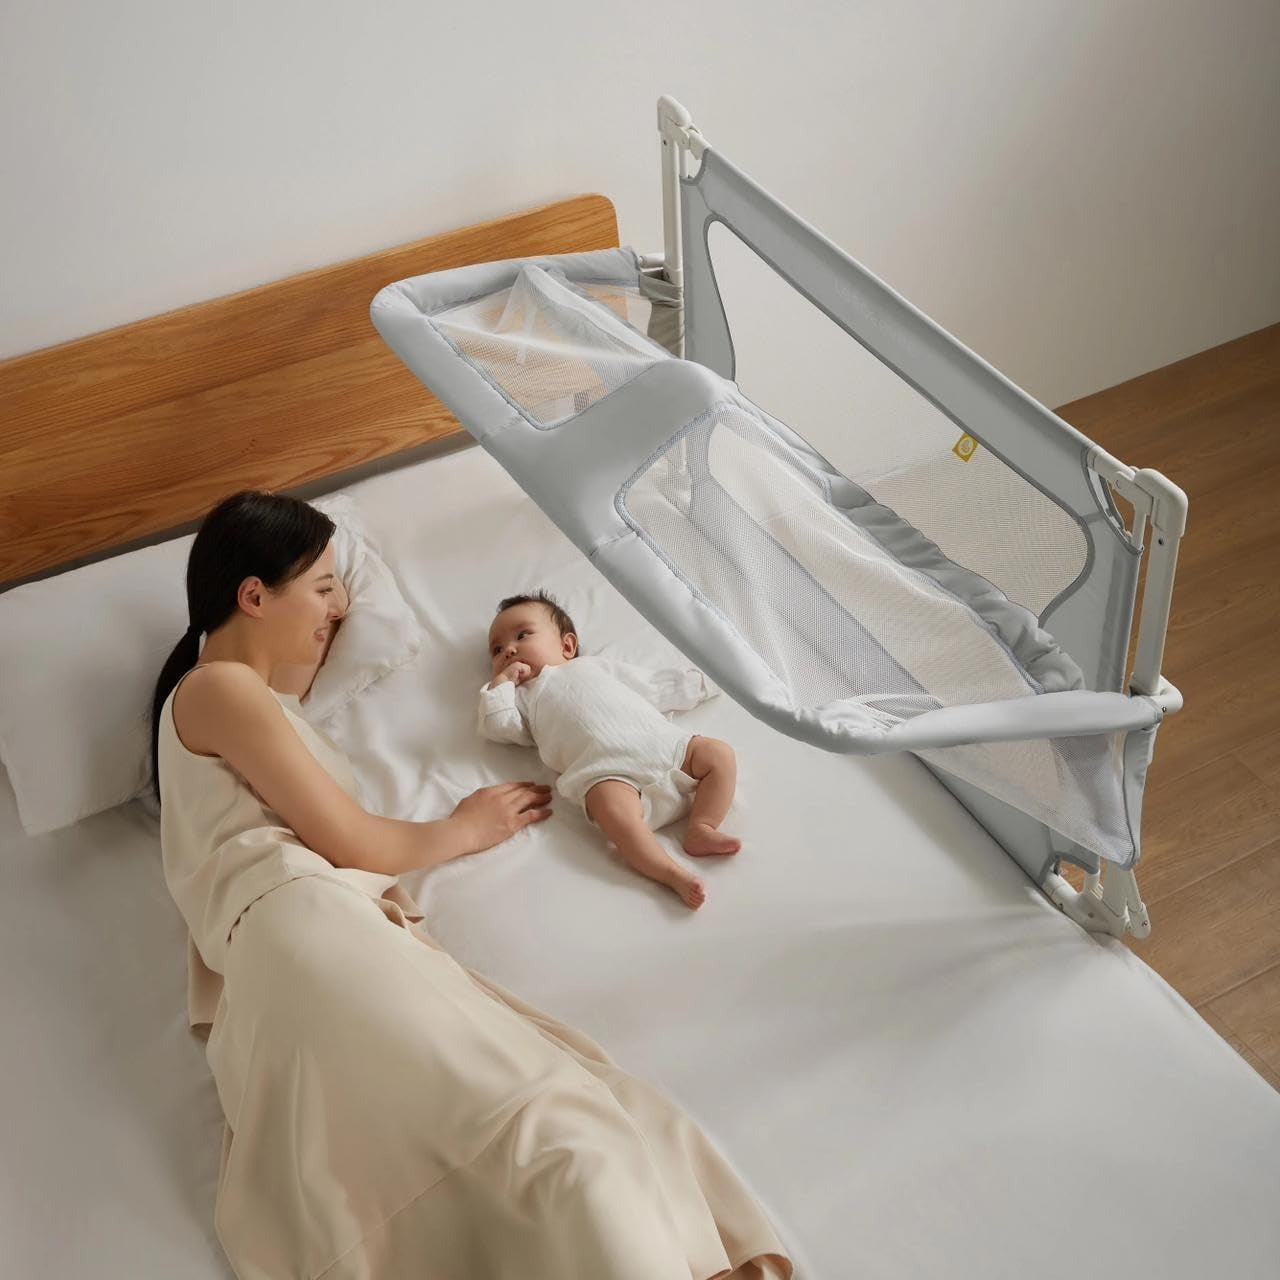 a mother having her time with her baby, who uses Height Adjustable Baby Bed to sleep